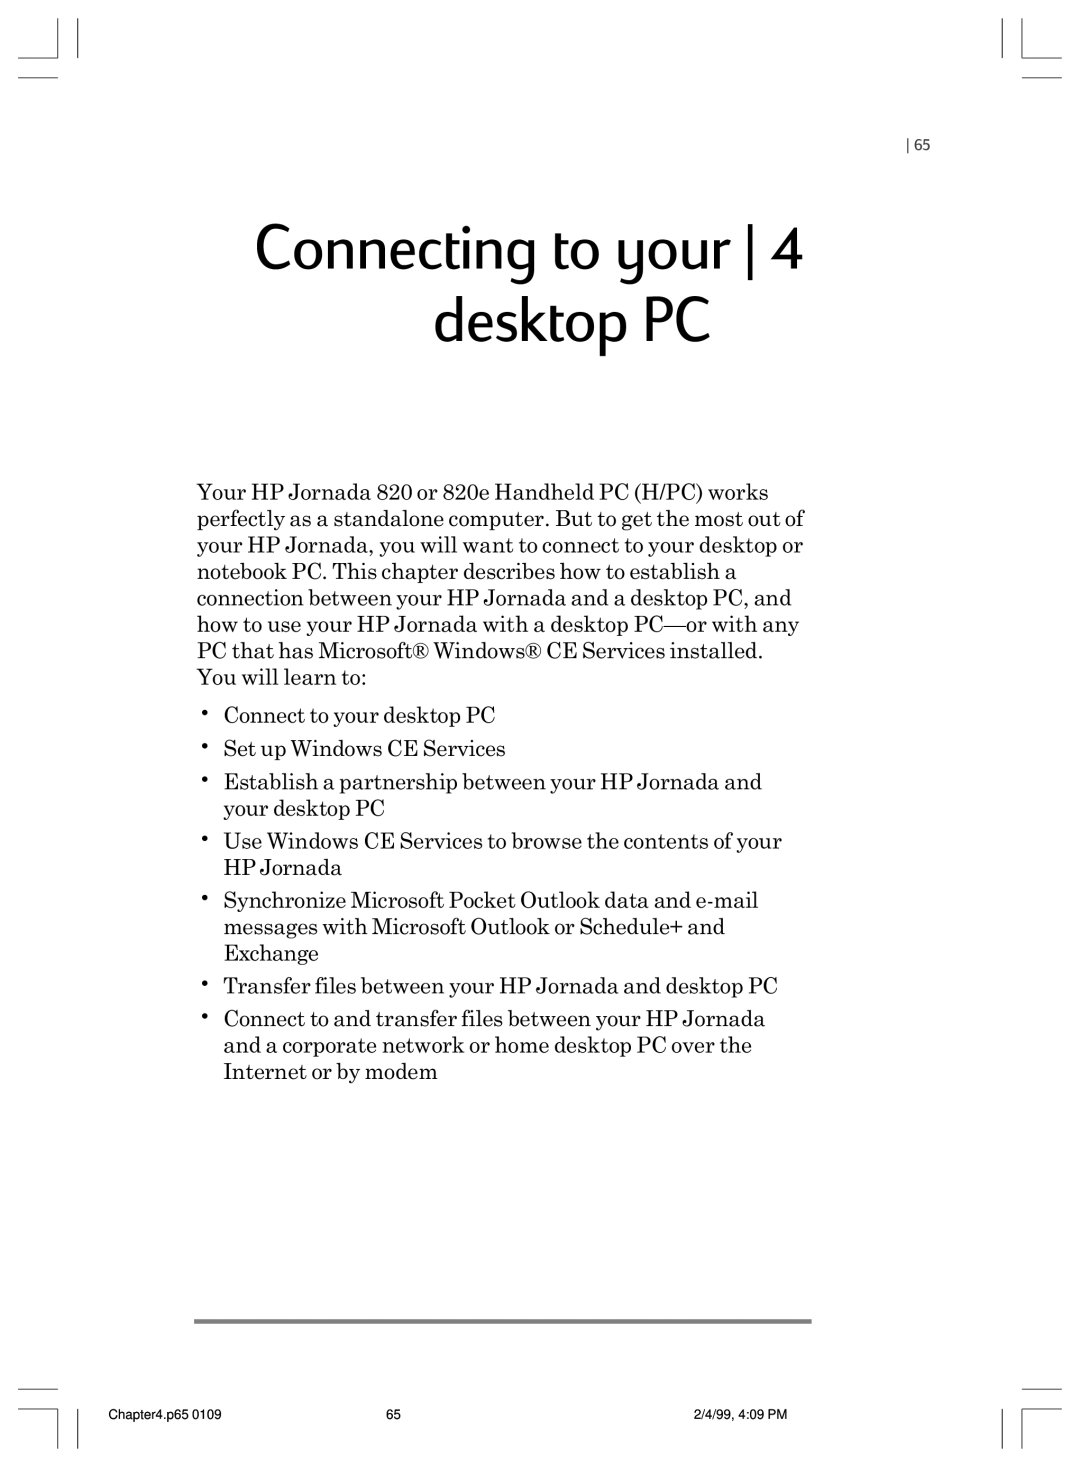 HP 820 E manual Connecting to your 4 desktop PC 